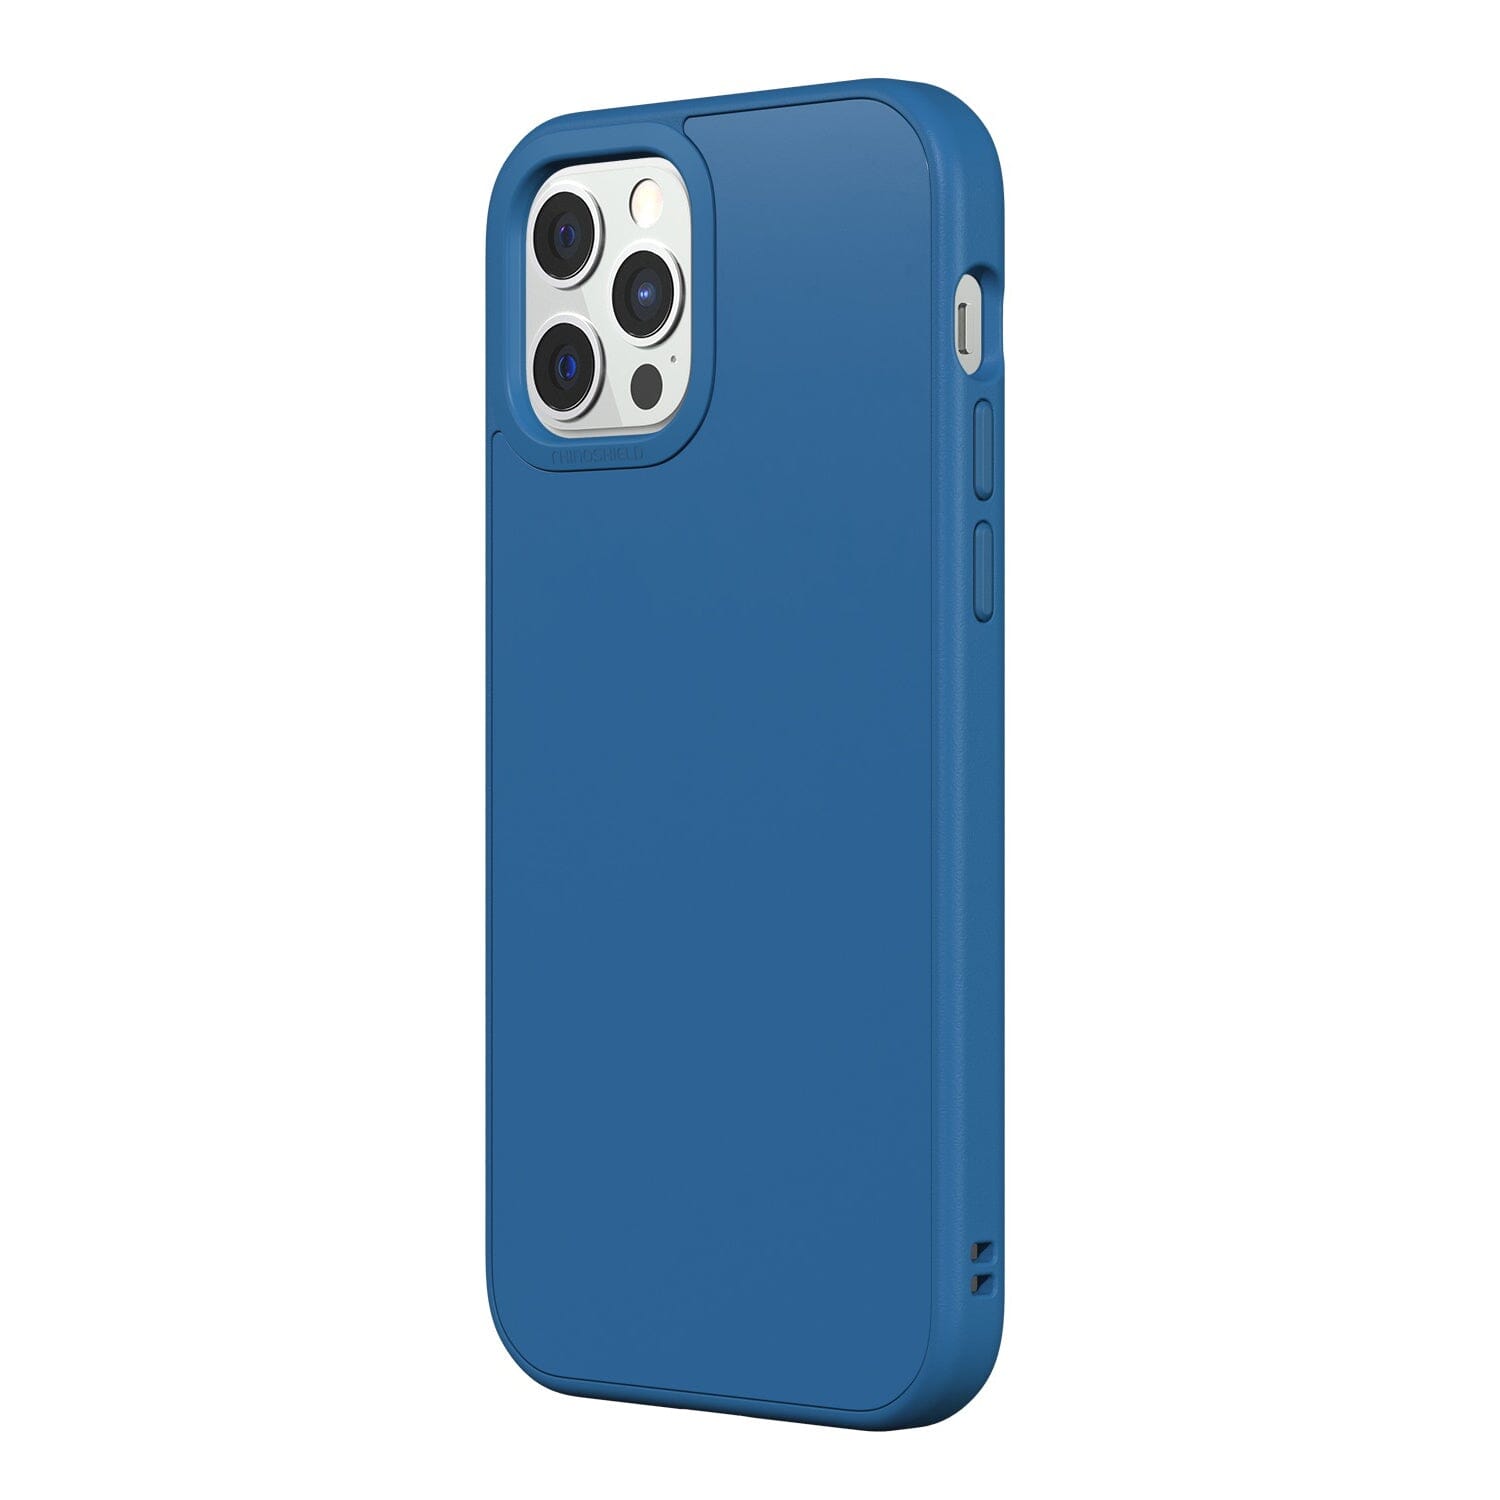 RhinoShield SolidSuit Protective Case with Premium Finish for iPhone 12 Series (2020) iPhone 12 Series RhinoShield iPhone 12 Pro Max 6.7" Classic Royal Blue 